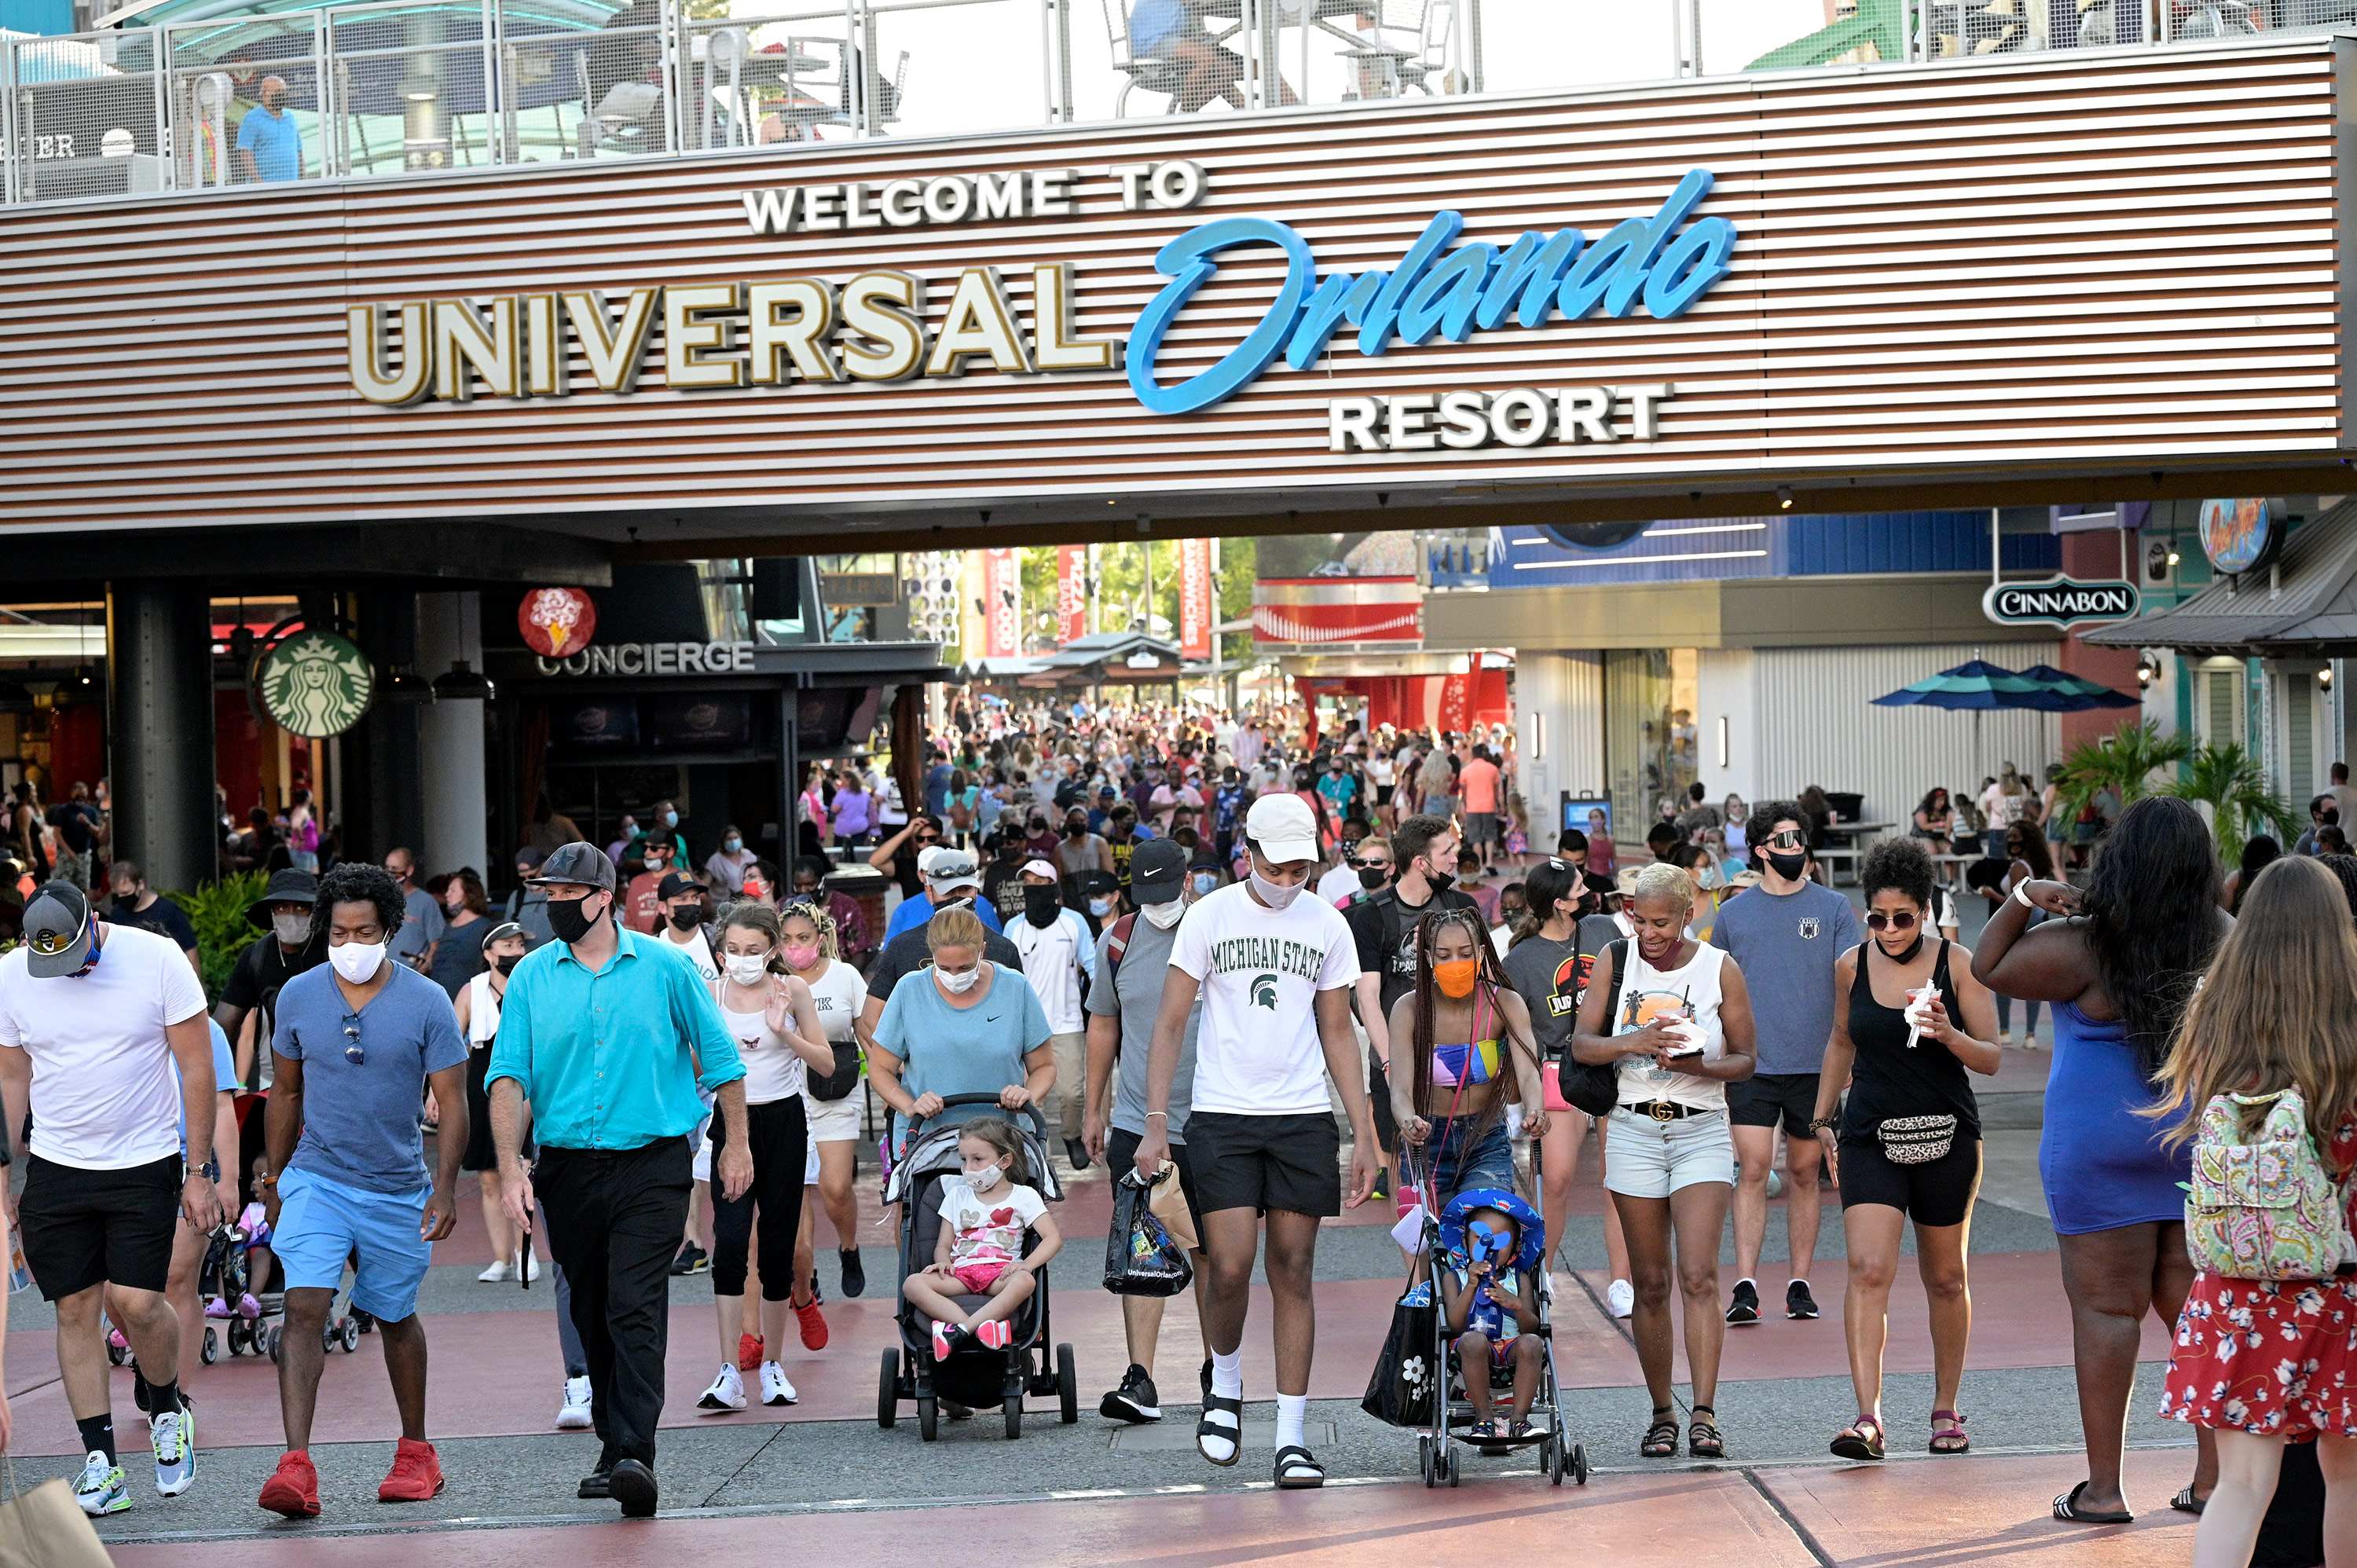 masks-will-no-longer-be-required-outdoors-at-universal-orlando-starting-saturday